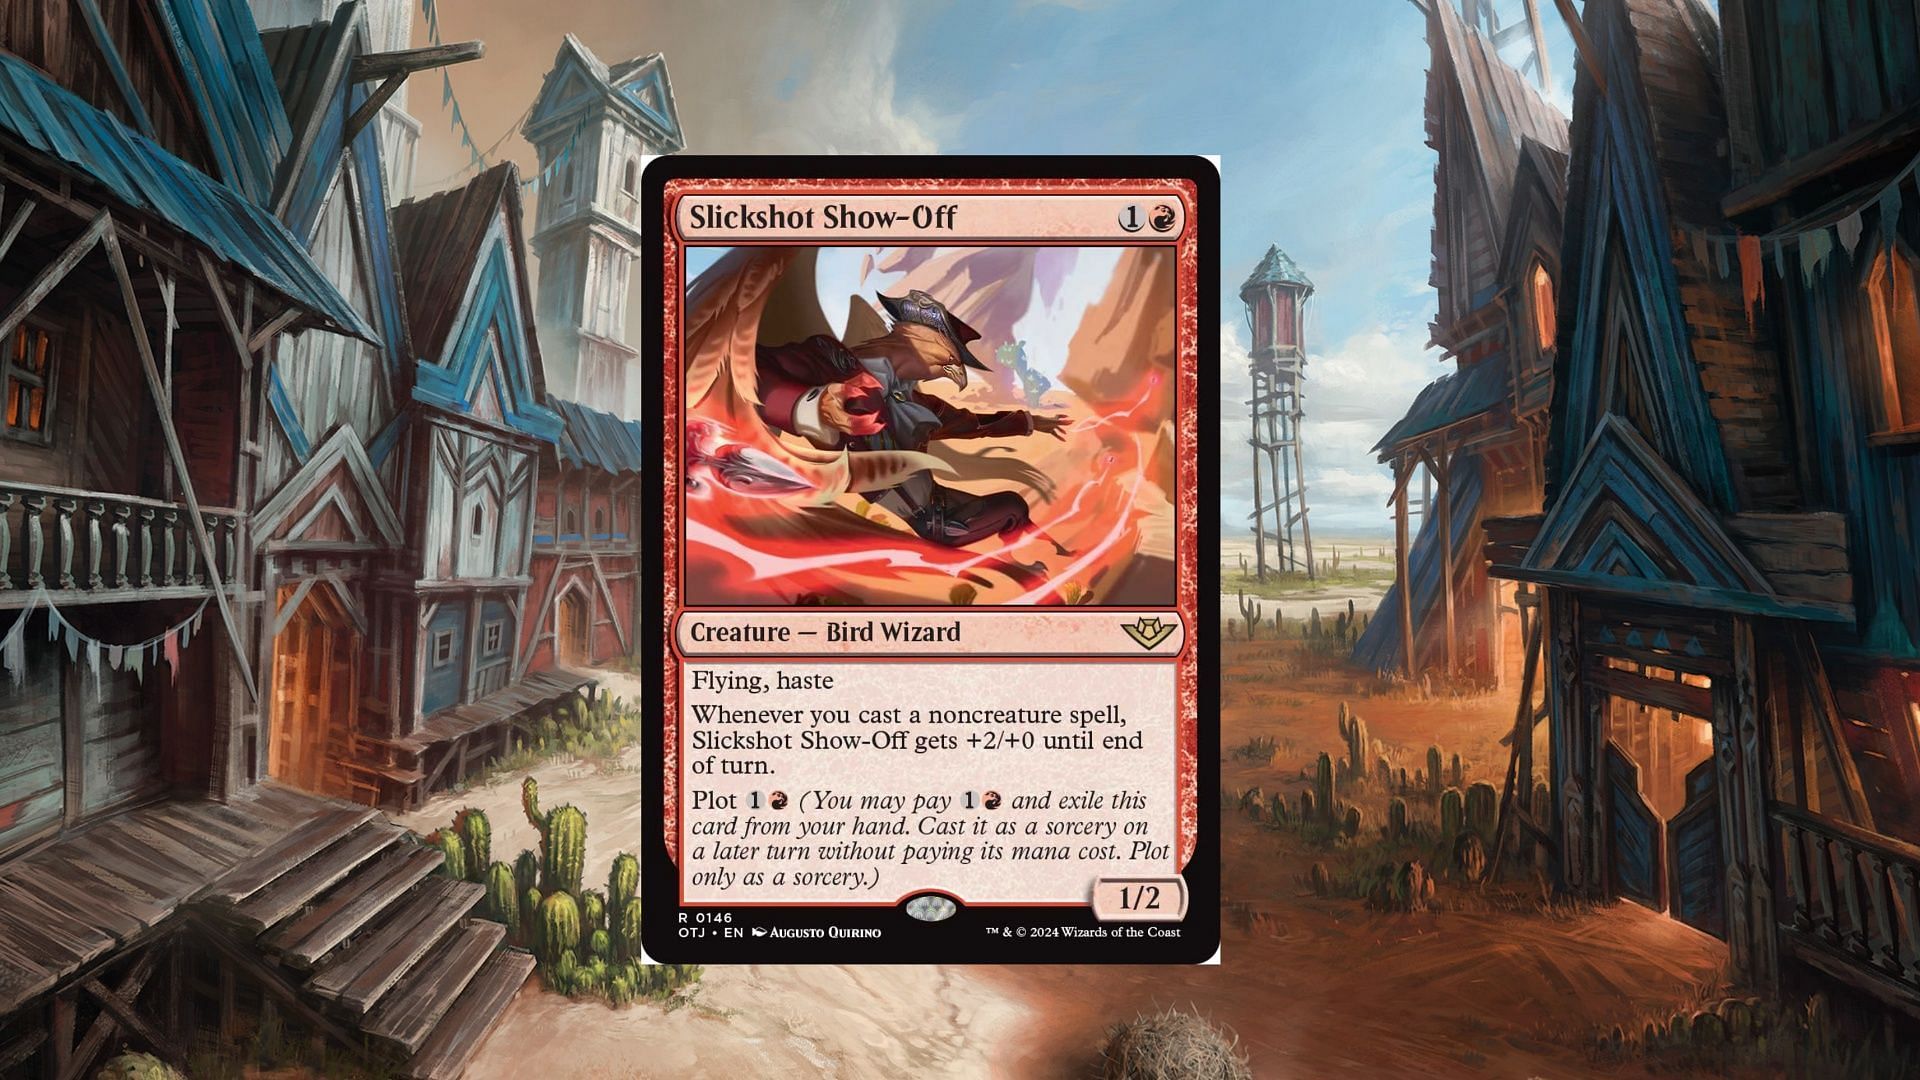 Slickshot Show-Off in Magic: The Gathering (Image via Wizards of the Coast)